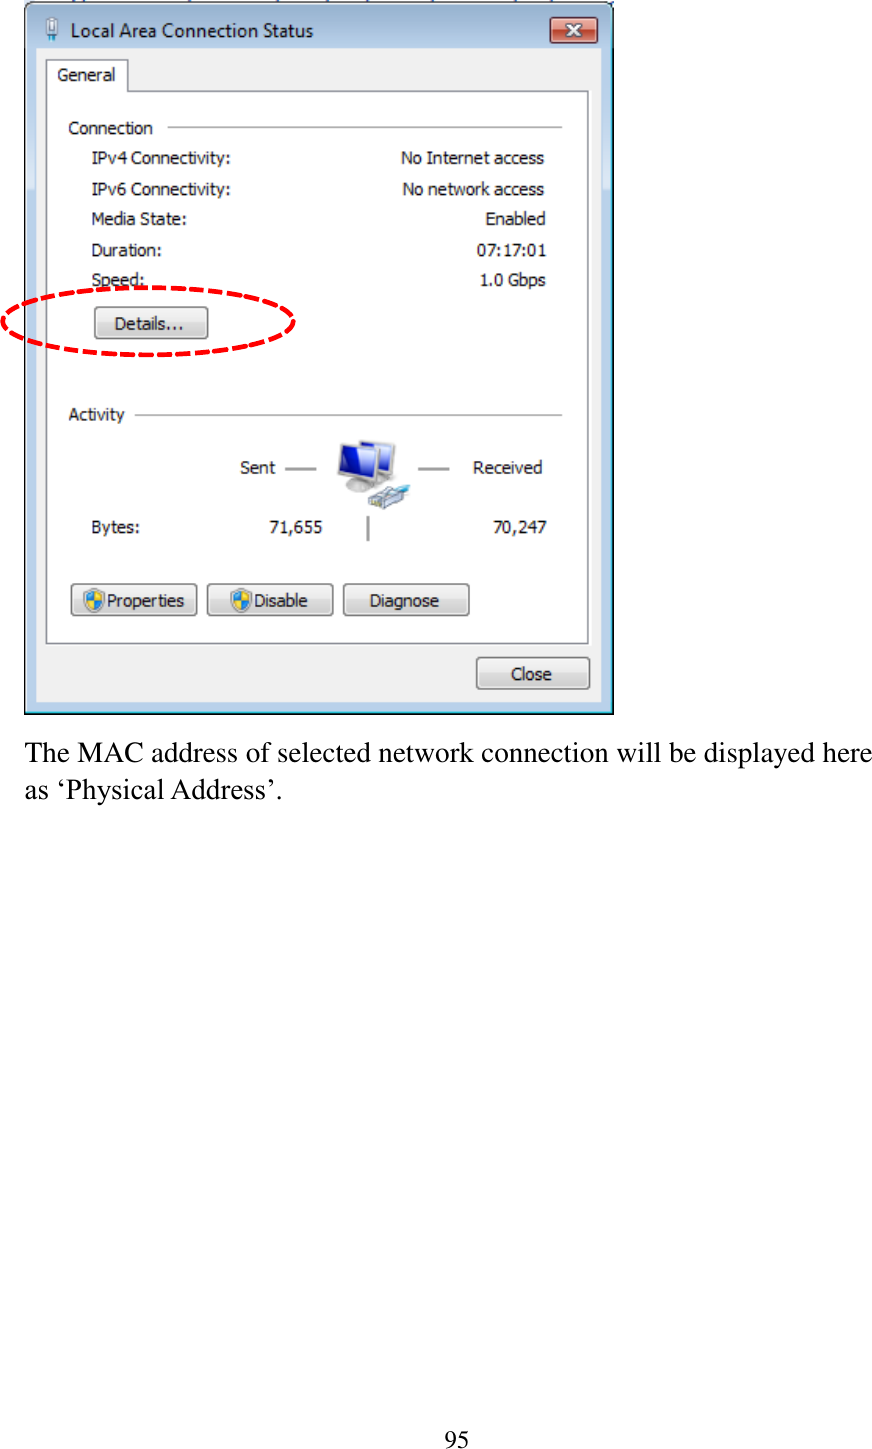 95   The MAC address of selected network connection will be displayed here as „Physical Address‟.  